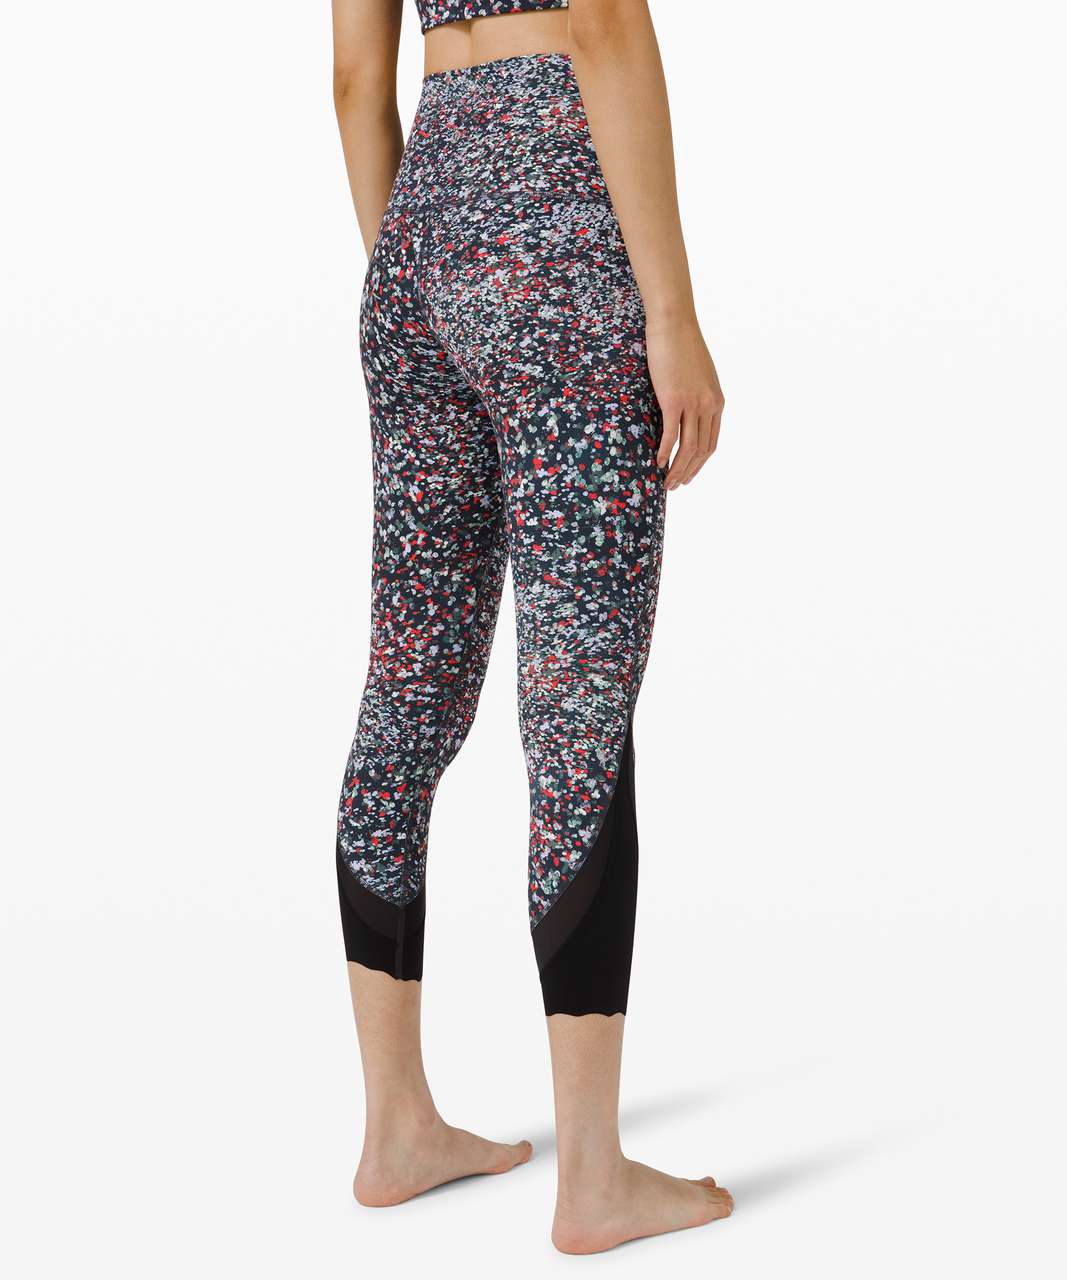 Lululemon Wunder Under High-Rise Crop 23" *Updated Scallop Full-On Luxtreme - Water Blossom Multi